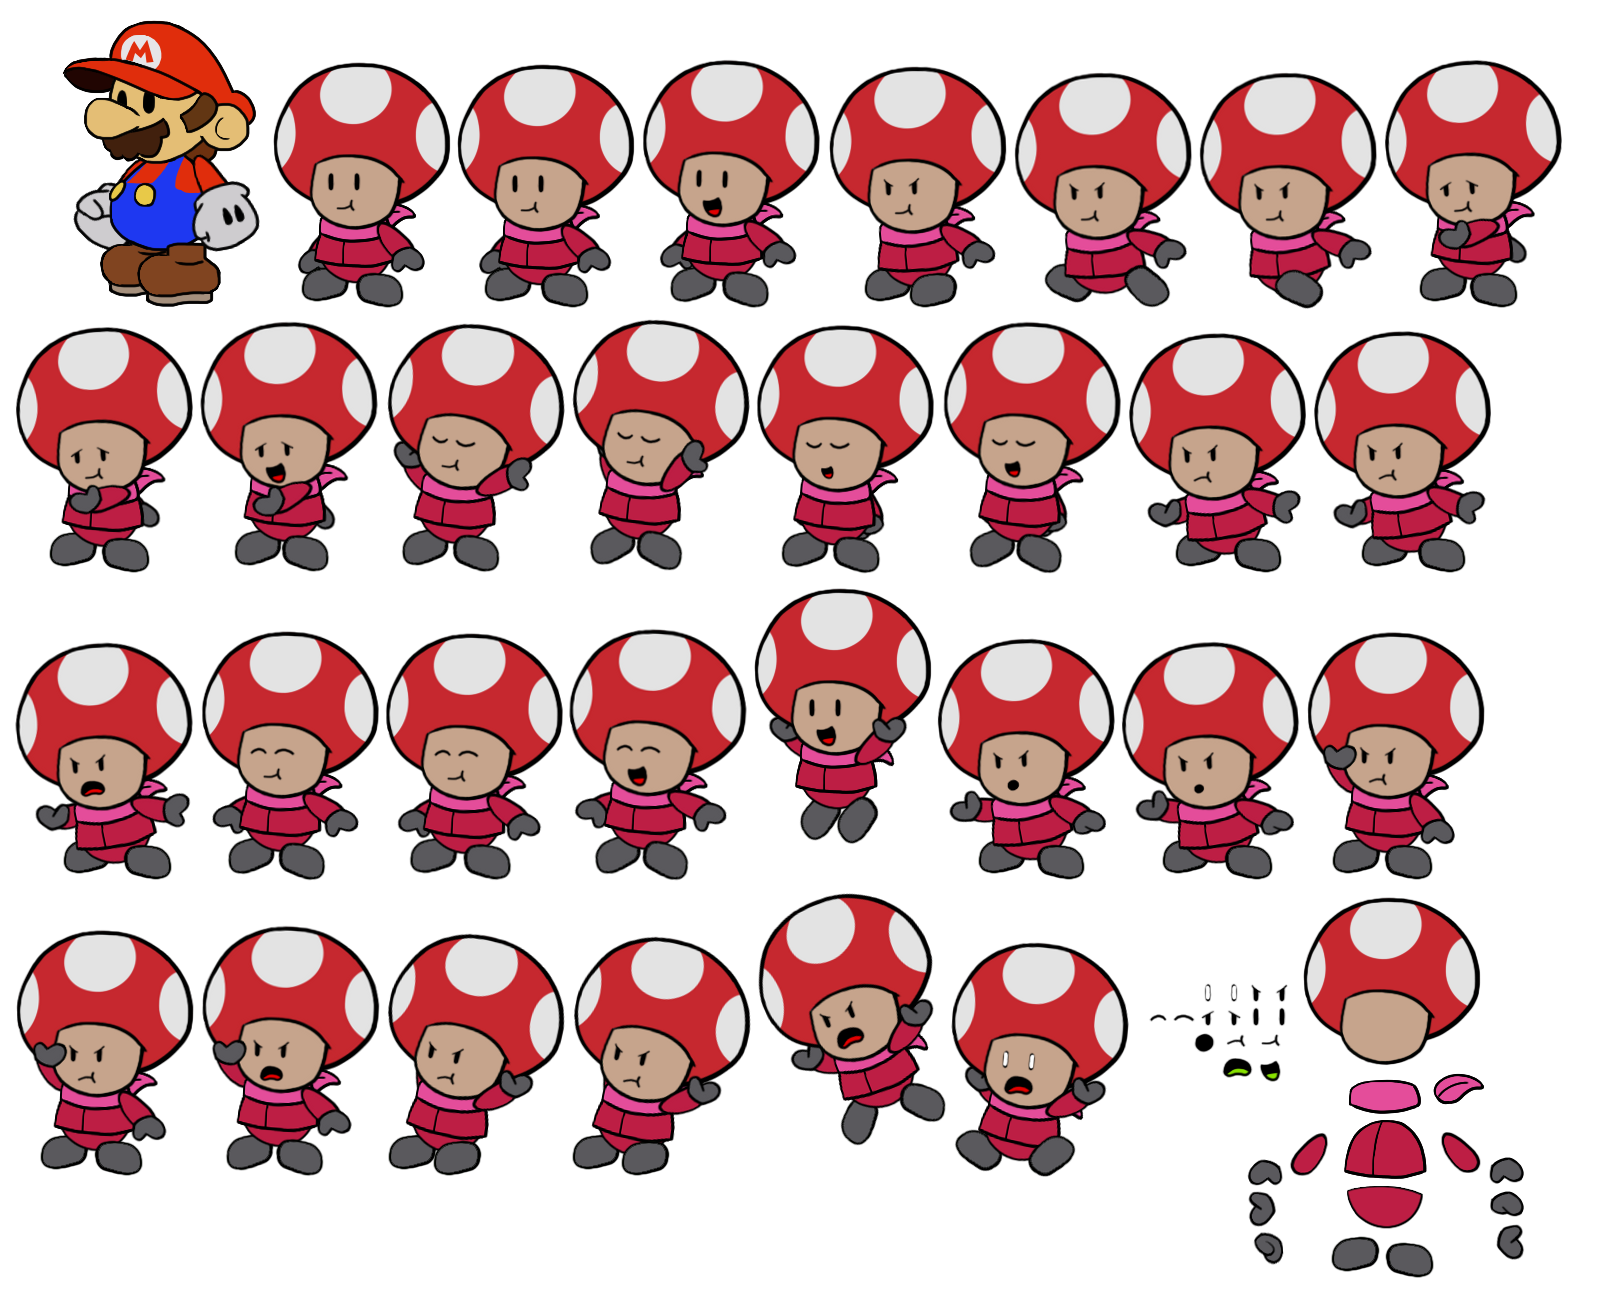 Rescue V Red (Paper Mario-Style)